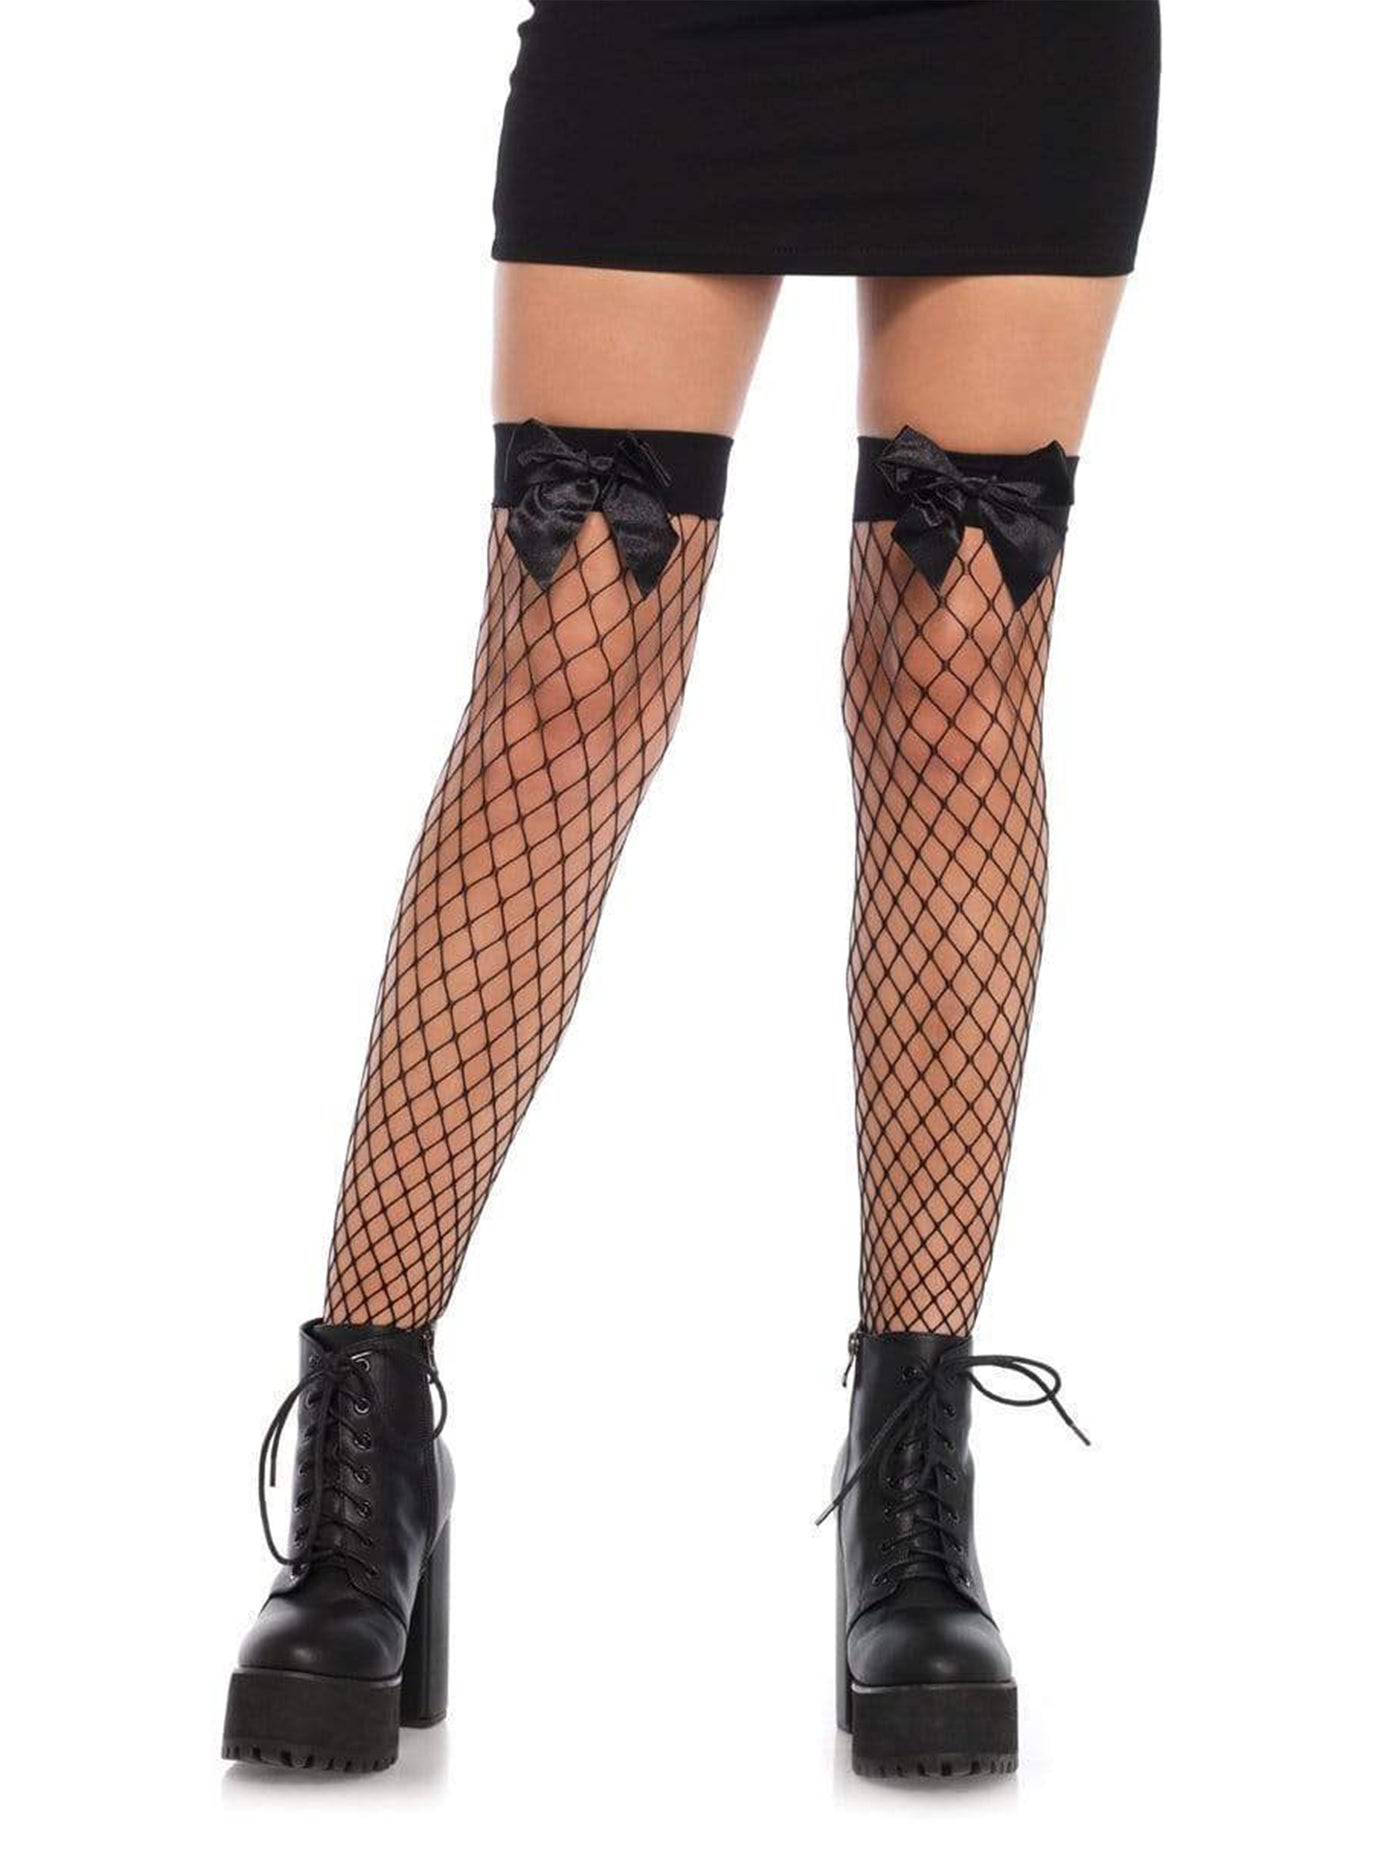 Womens Large Diamond Fishnet Thigh High Stockings with Lace Top & Black Satin Bow - Costumes & Lingerie Australia